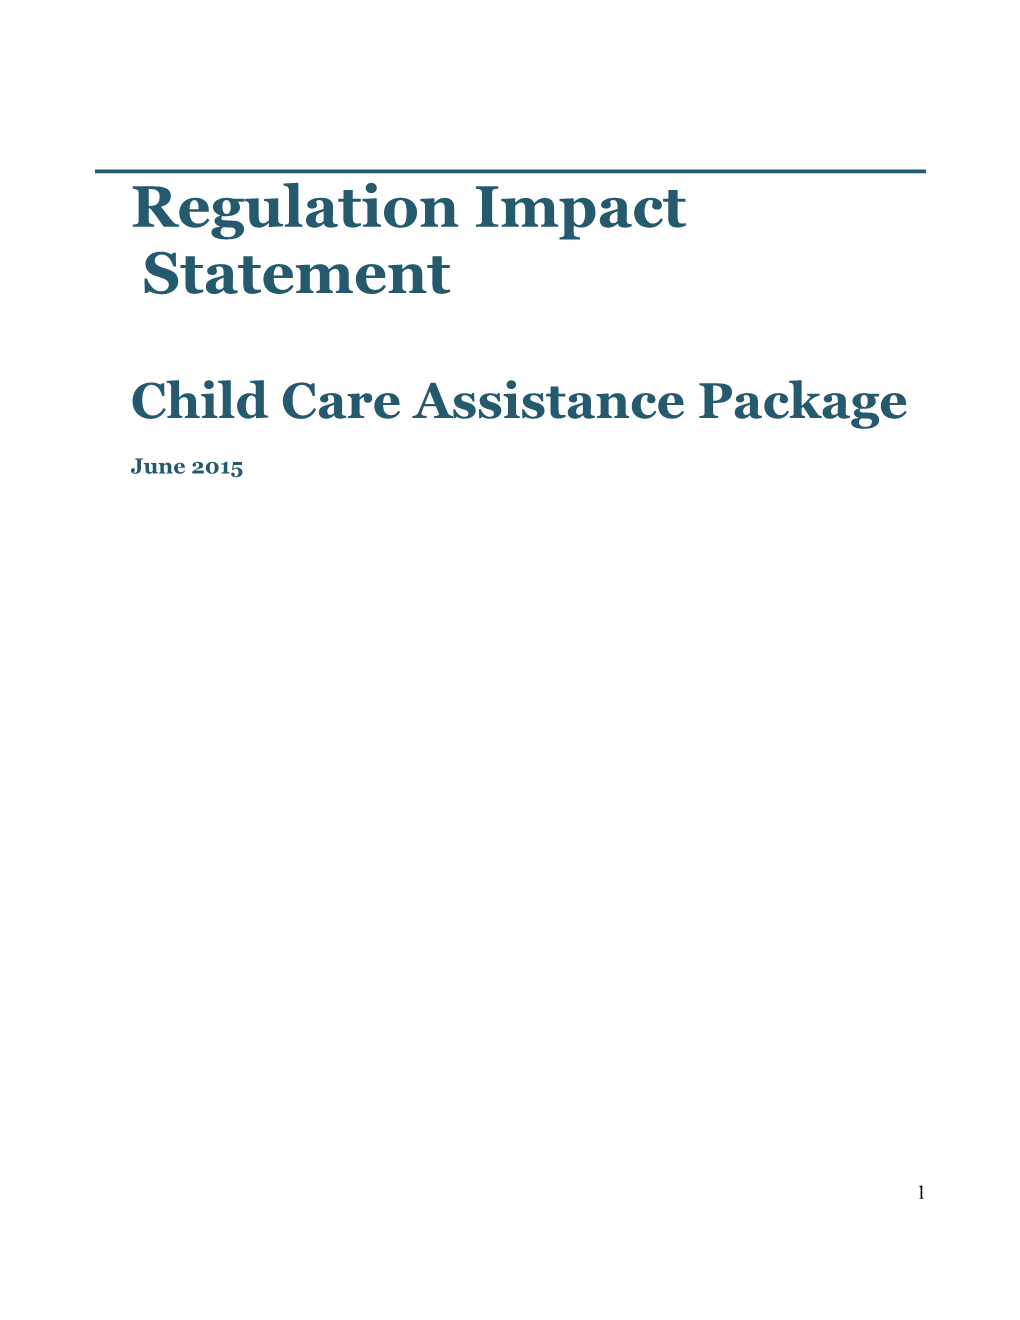 Child Care Assistance Package